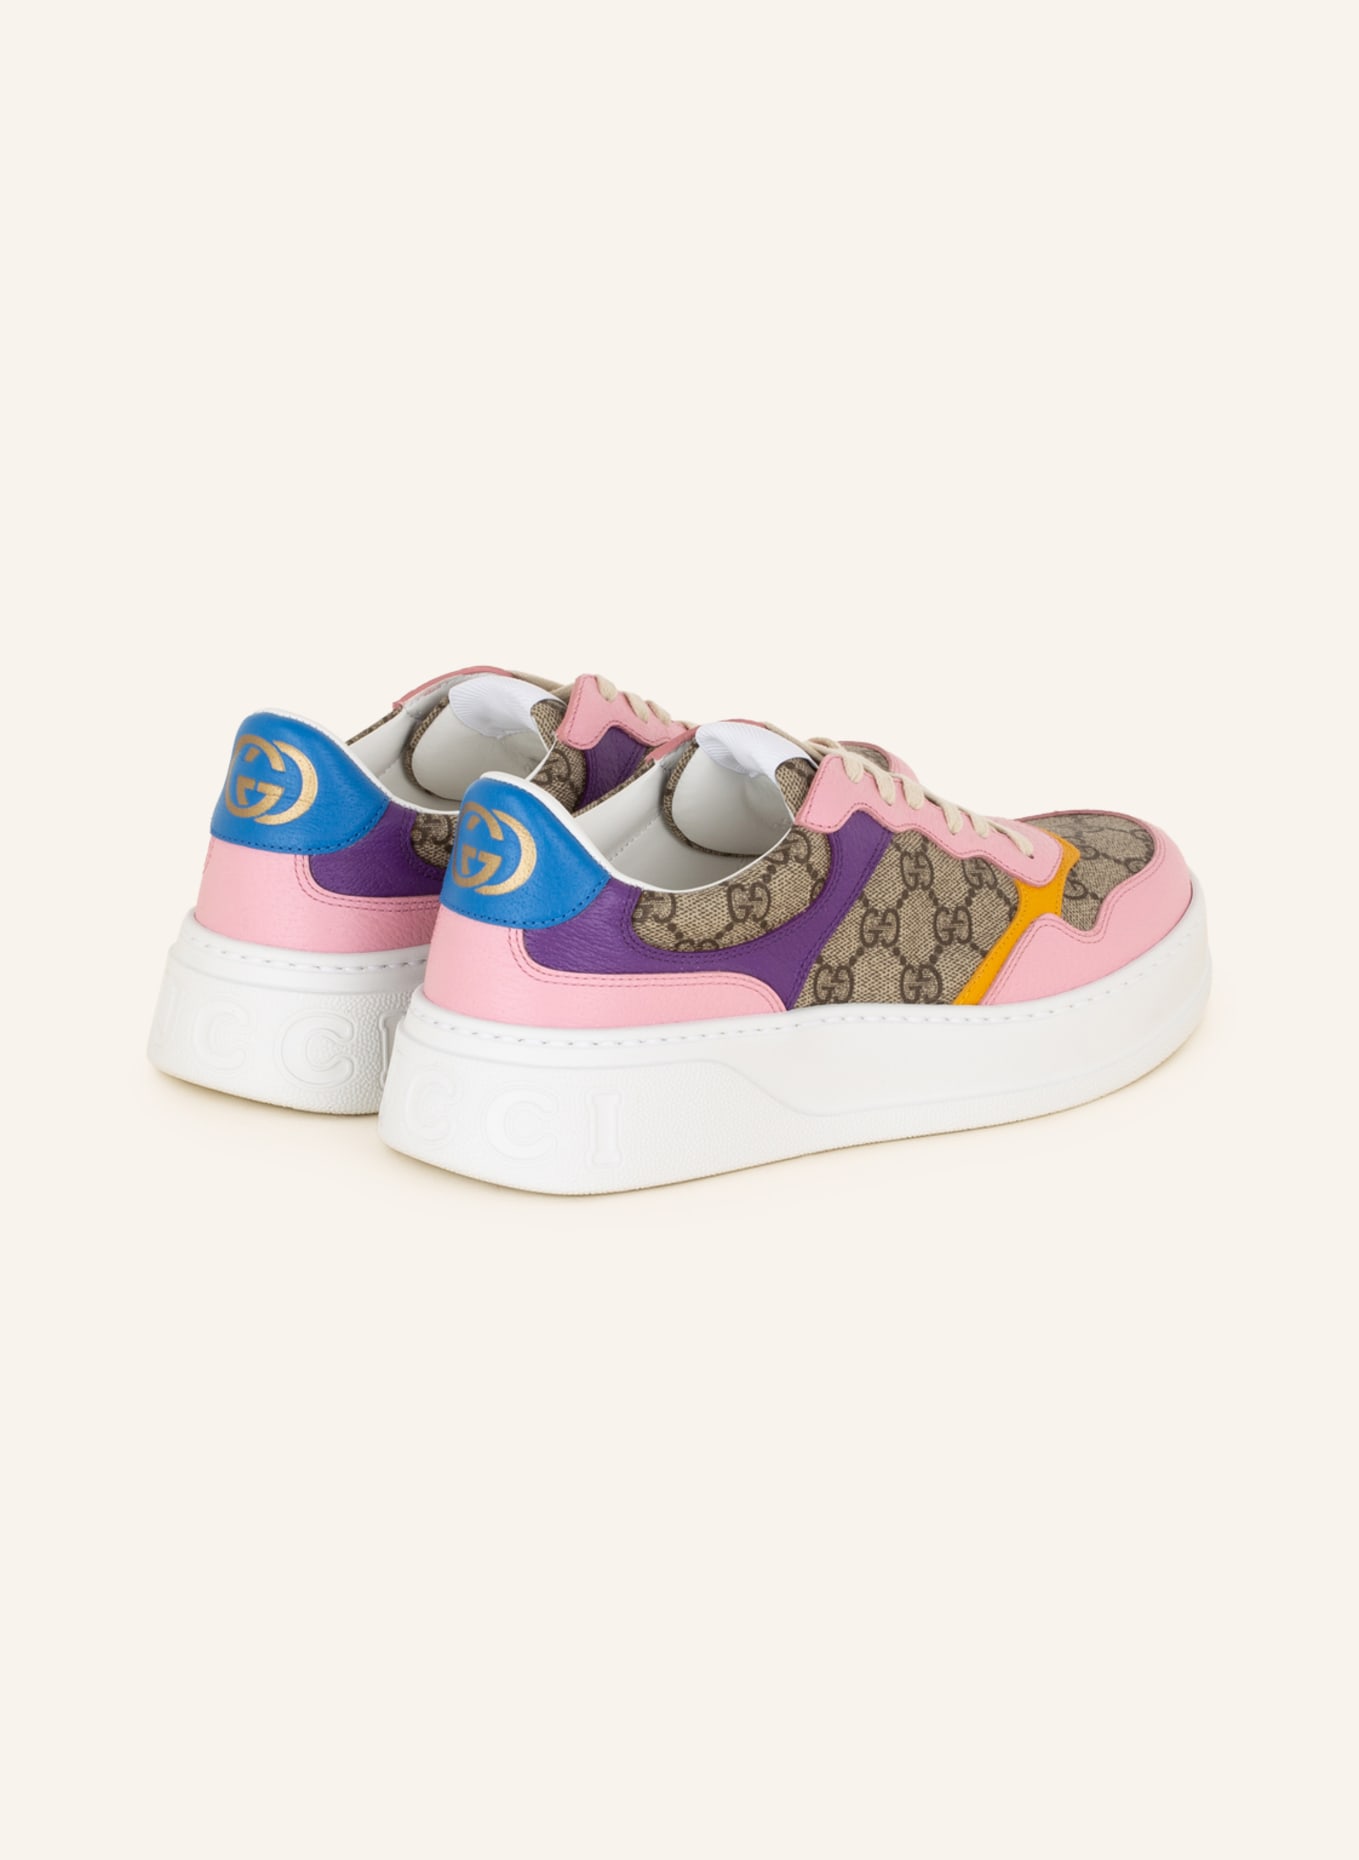 Buy the Gucci Rhyton Mouth Print Distressed Leather Sneakers Women's Size  7.5 | GoodwillFinds